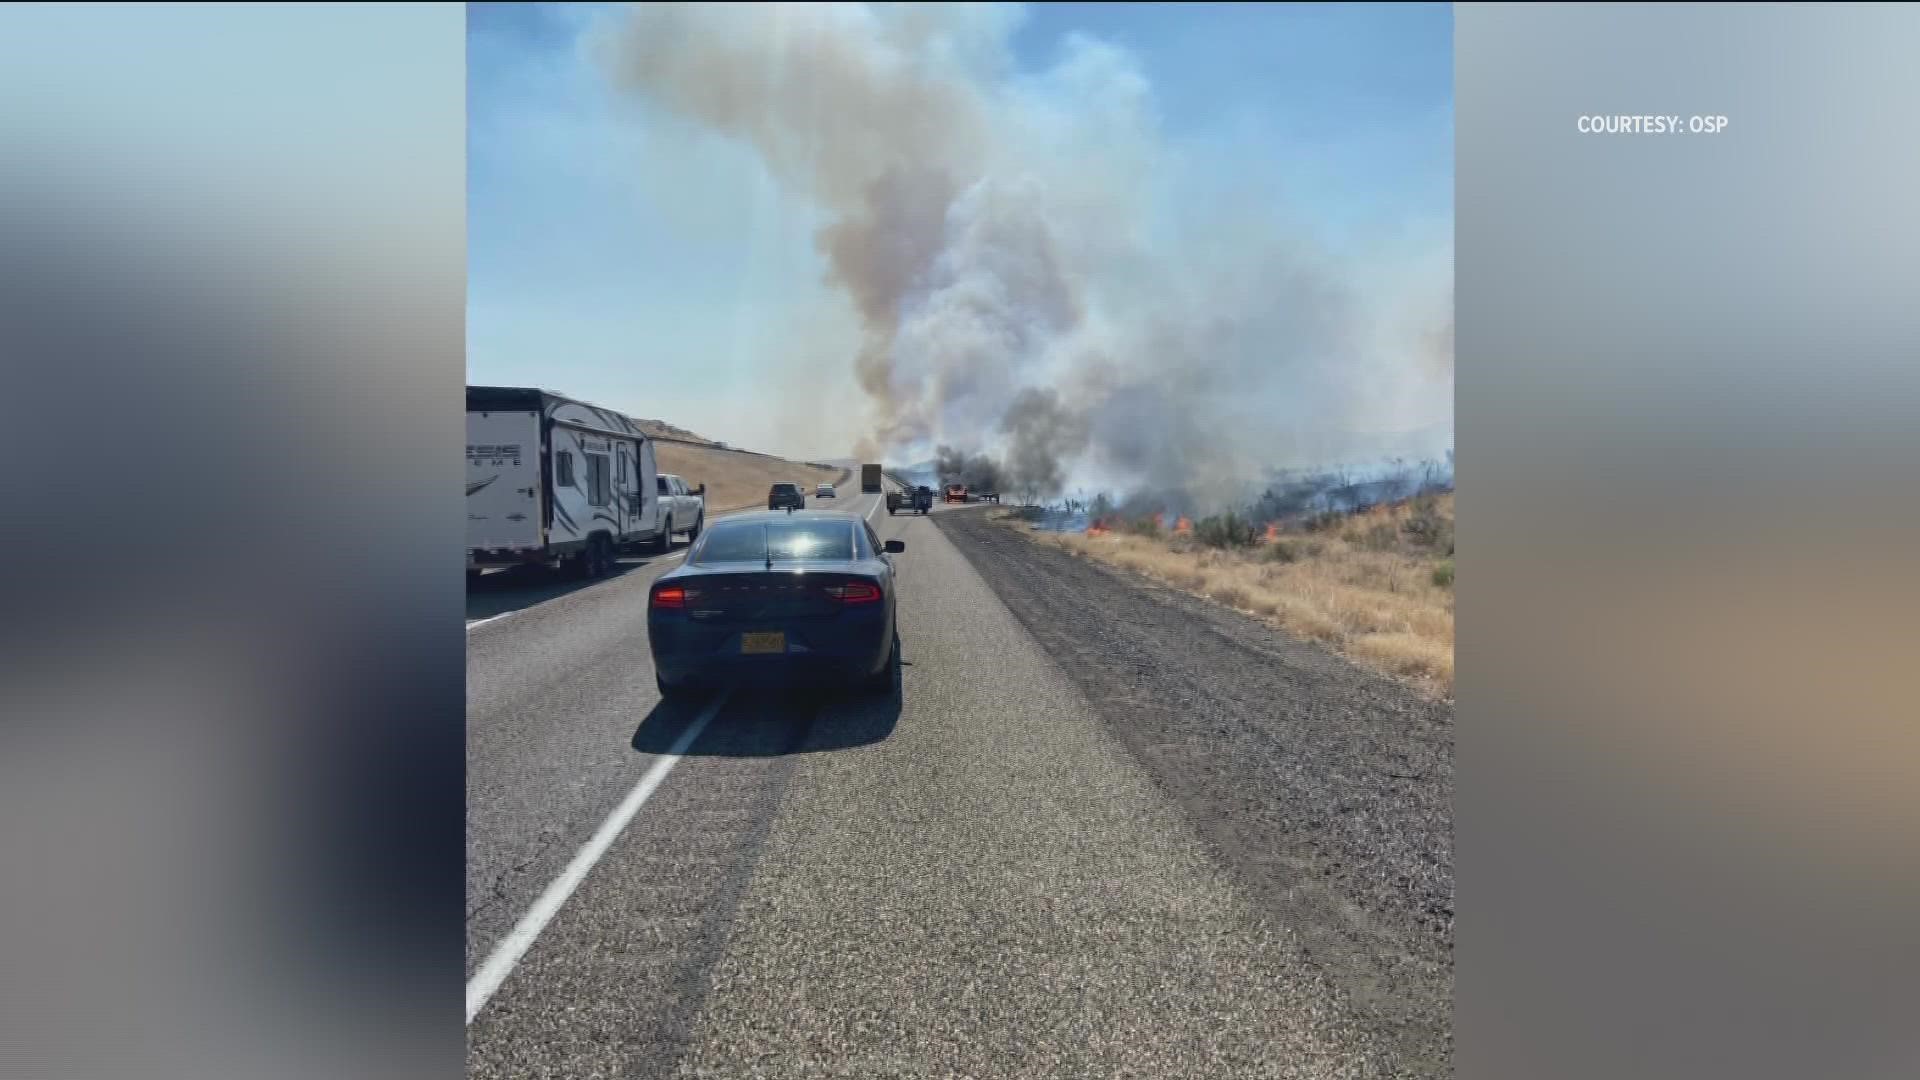 I-84 was temporarily closed Thursday from Pendleton and Ontario due to the Vale wildfire, formerly known as the 365 wildfire.